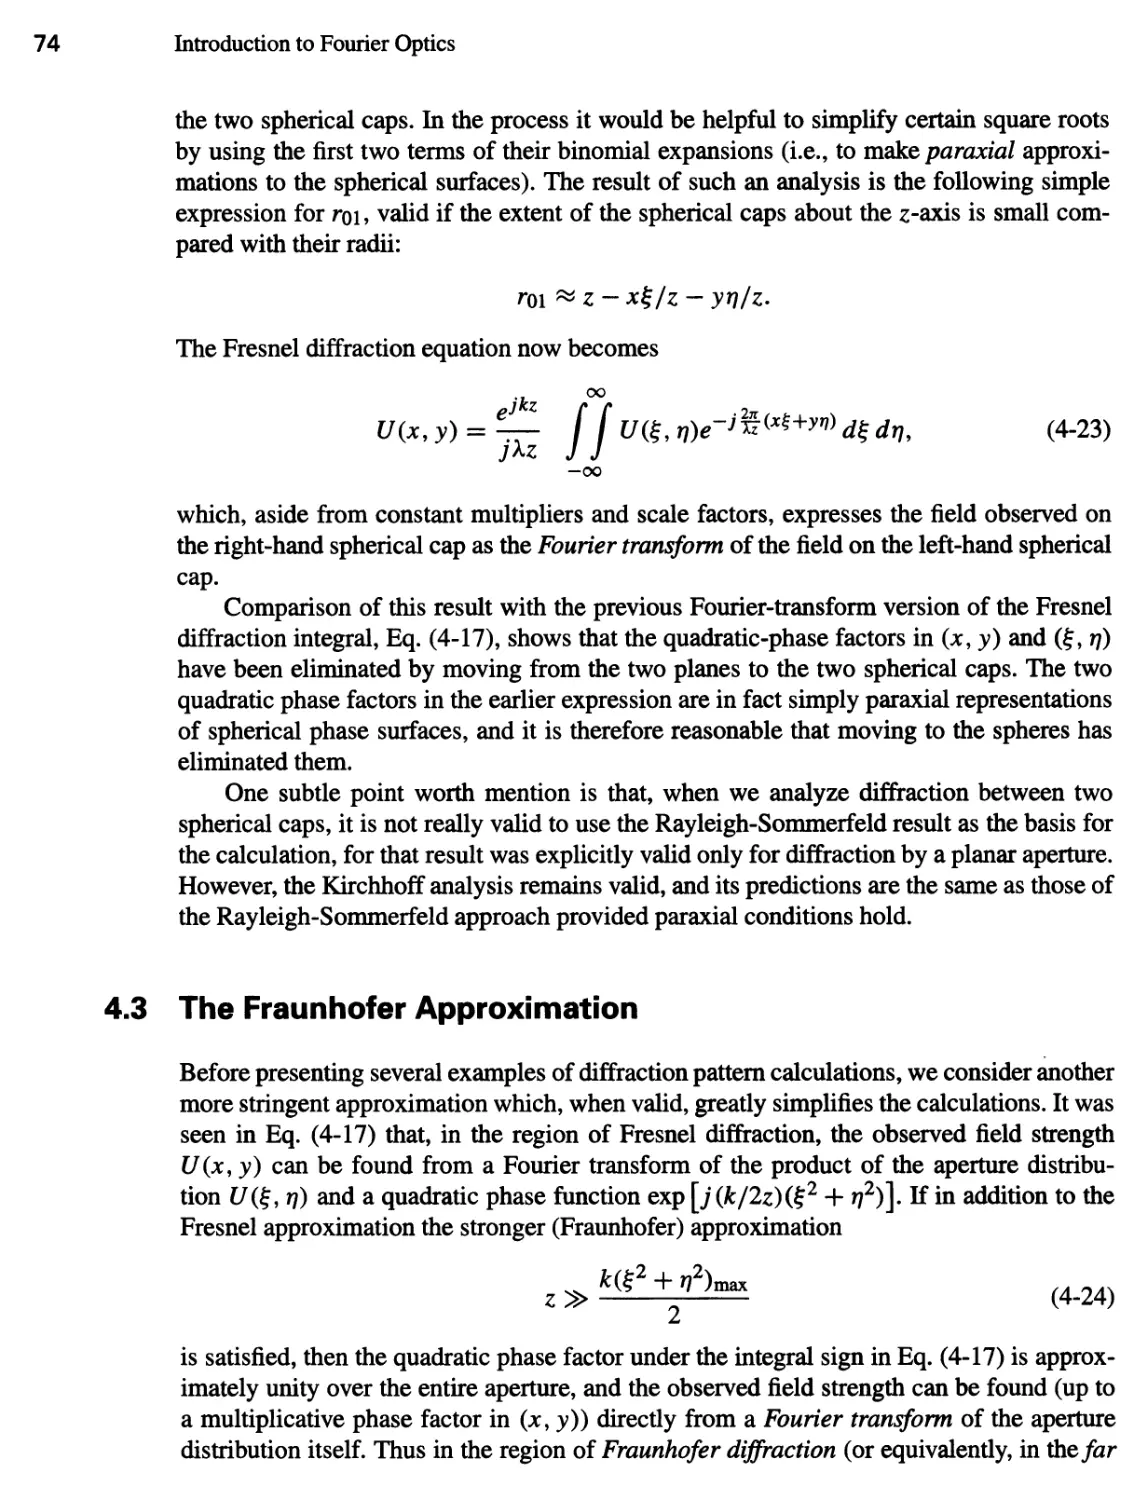 4.3 The Fraunhofer Approximation 74